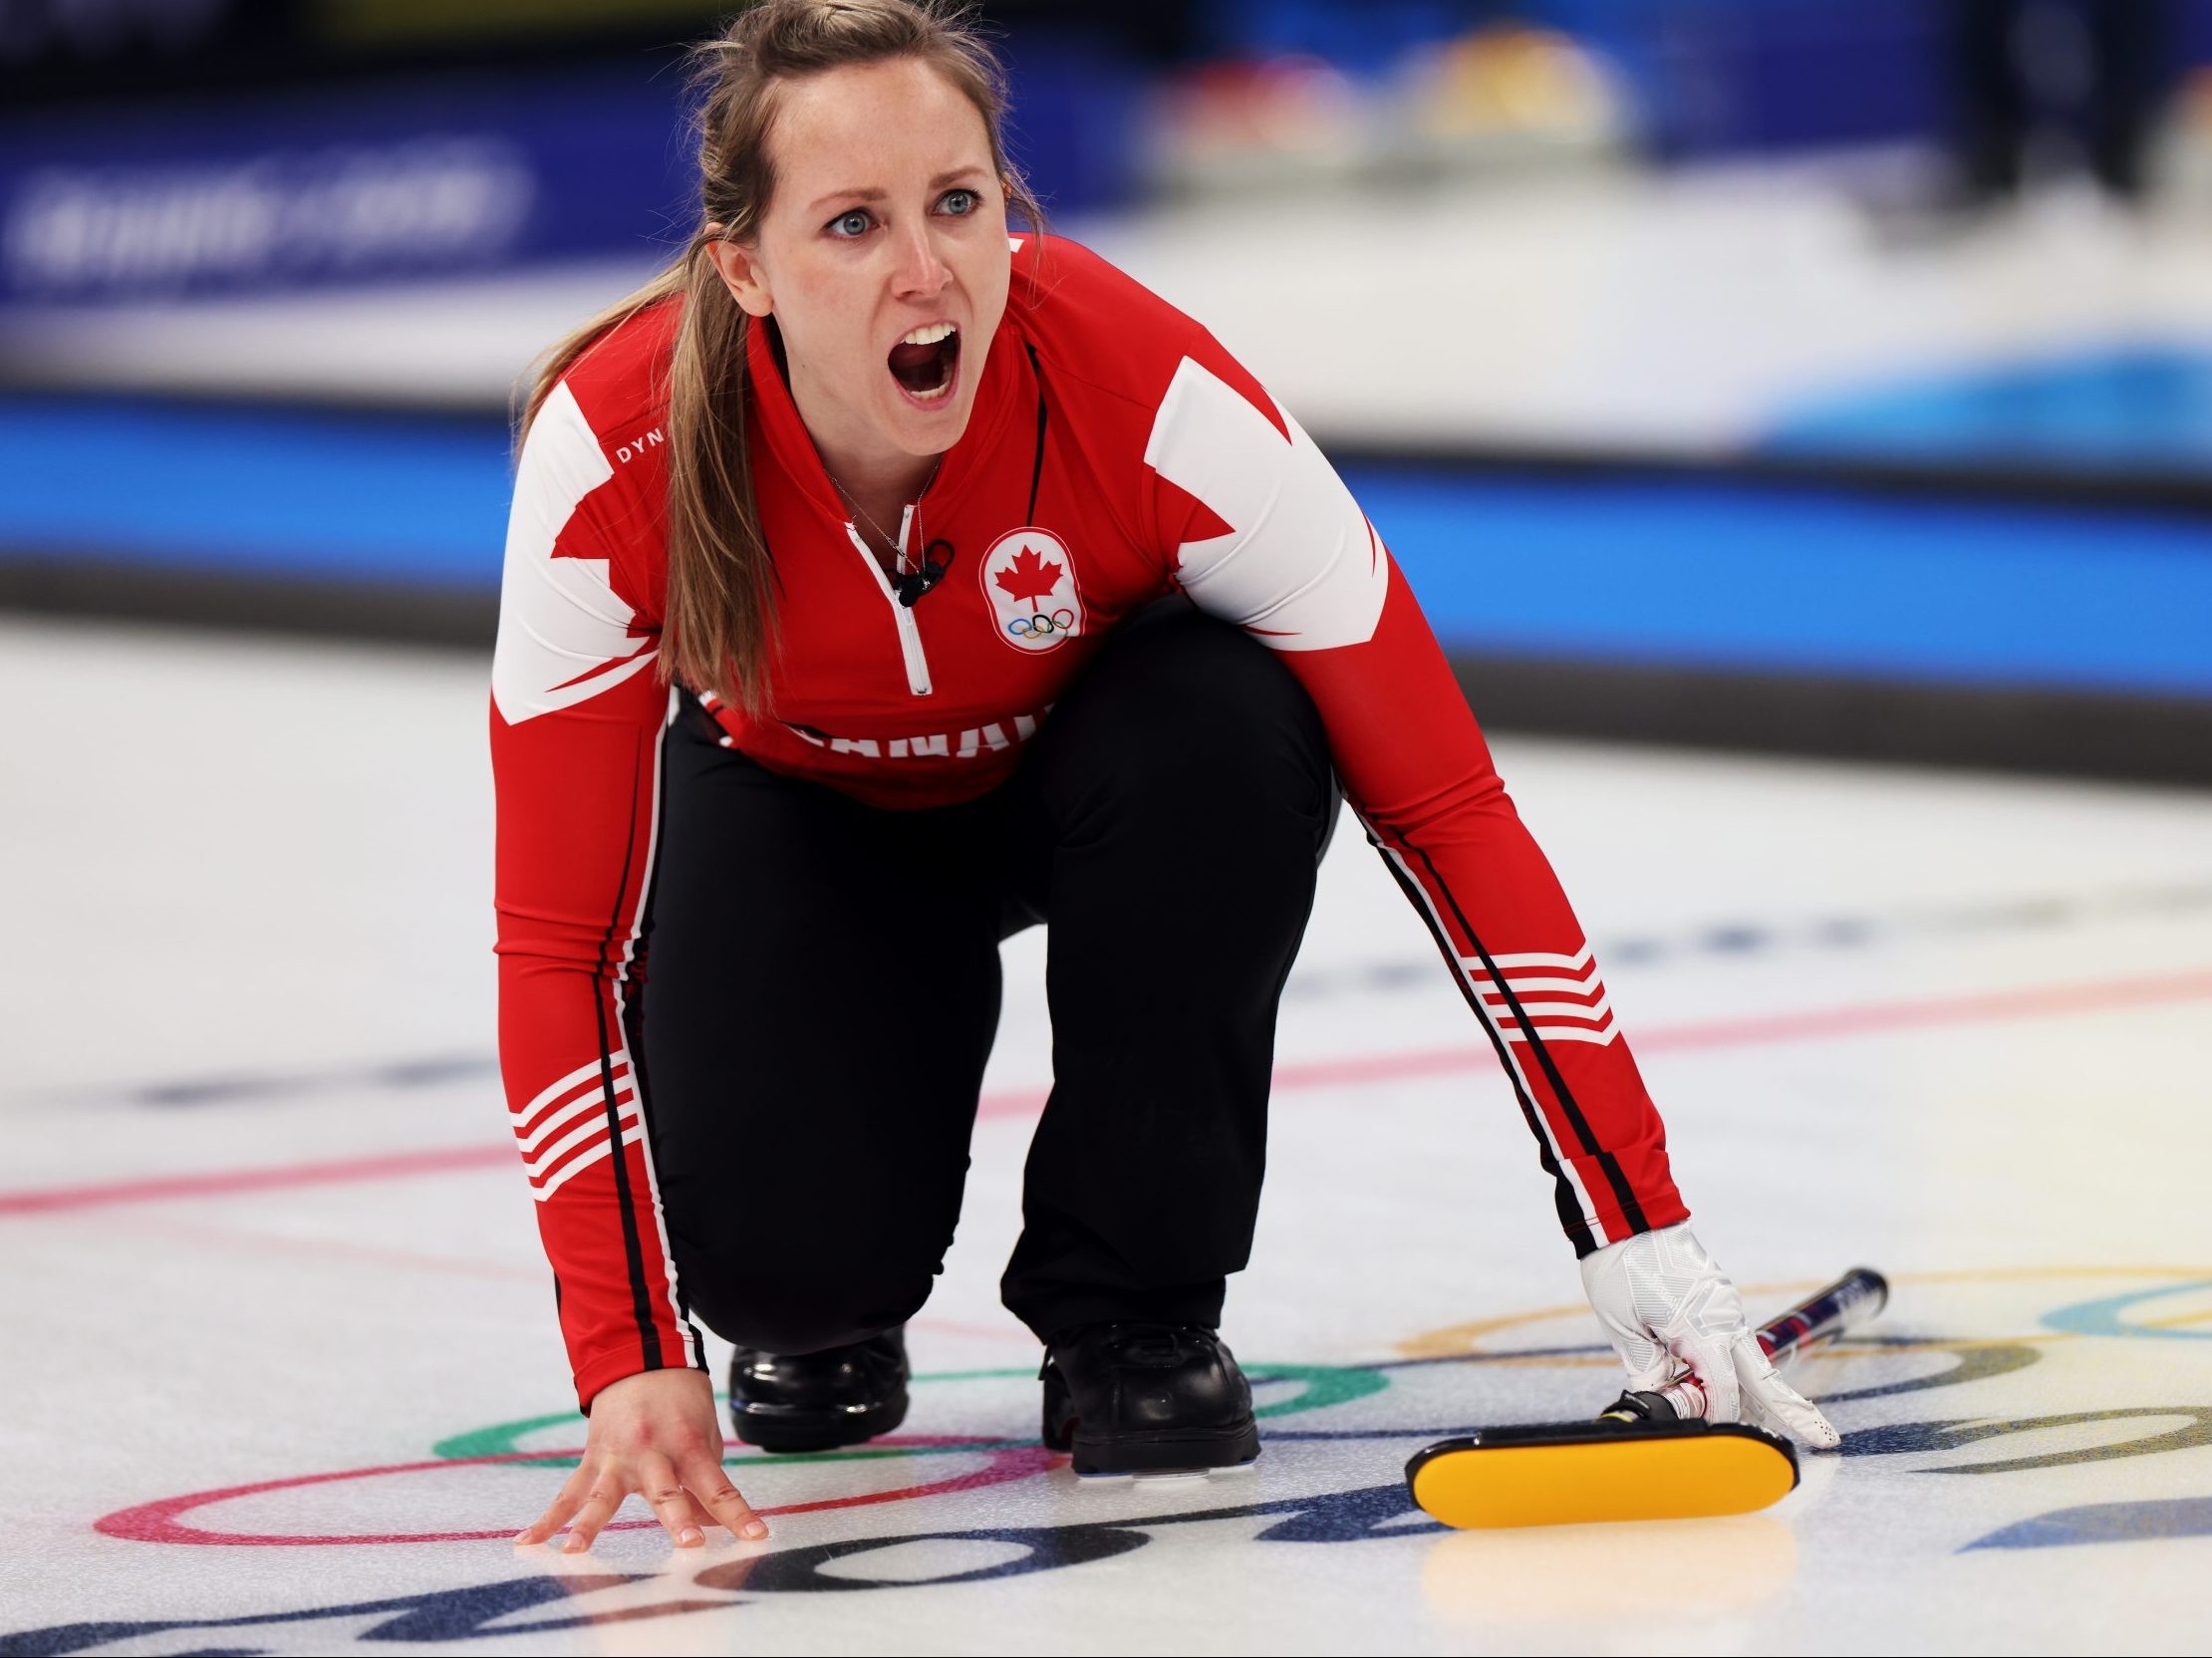 ON THE ROCKS: New-look Team Homan making things happen with Fleury calling the games